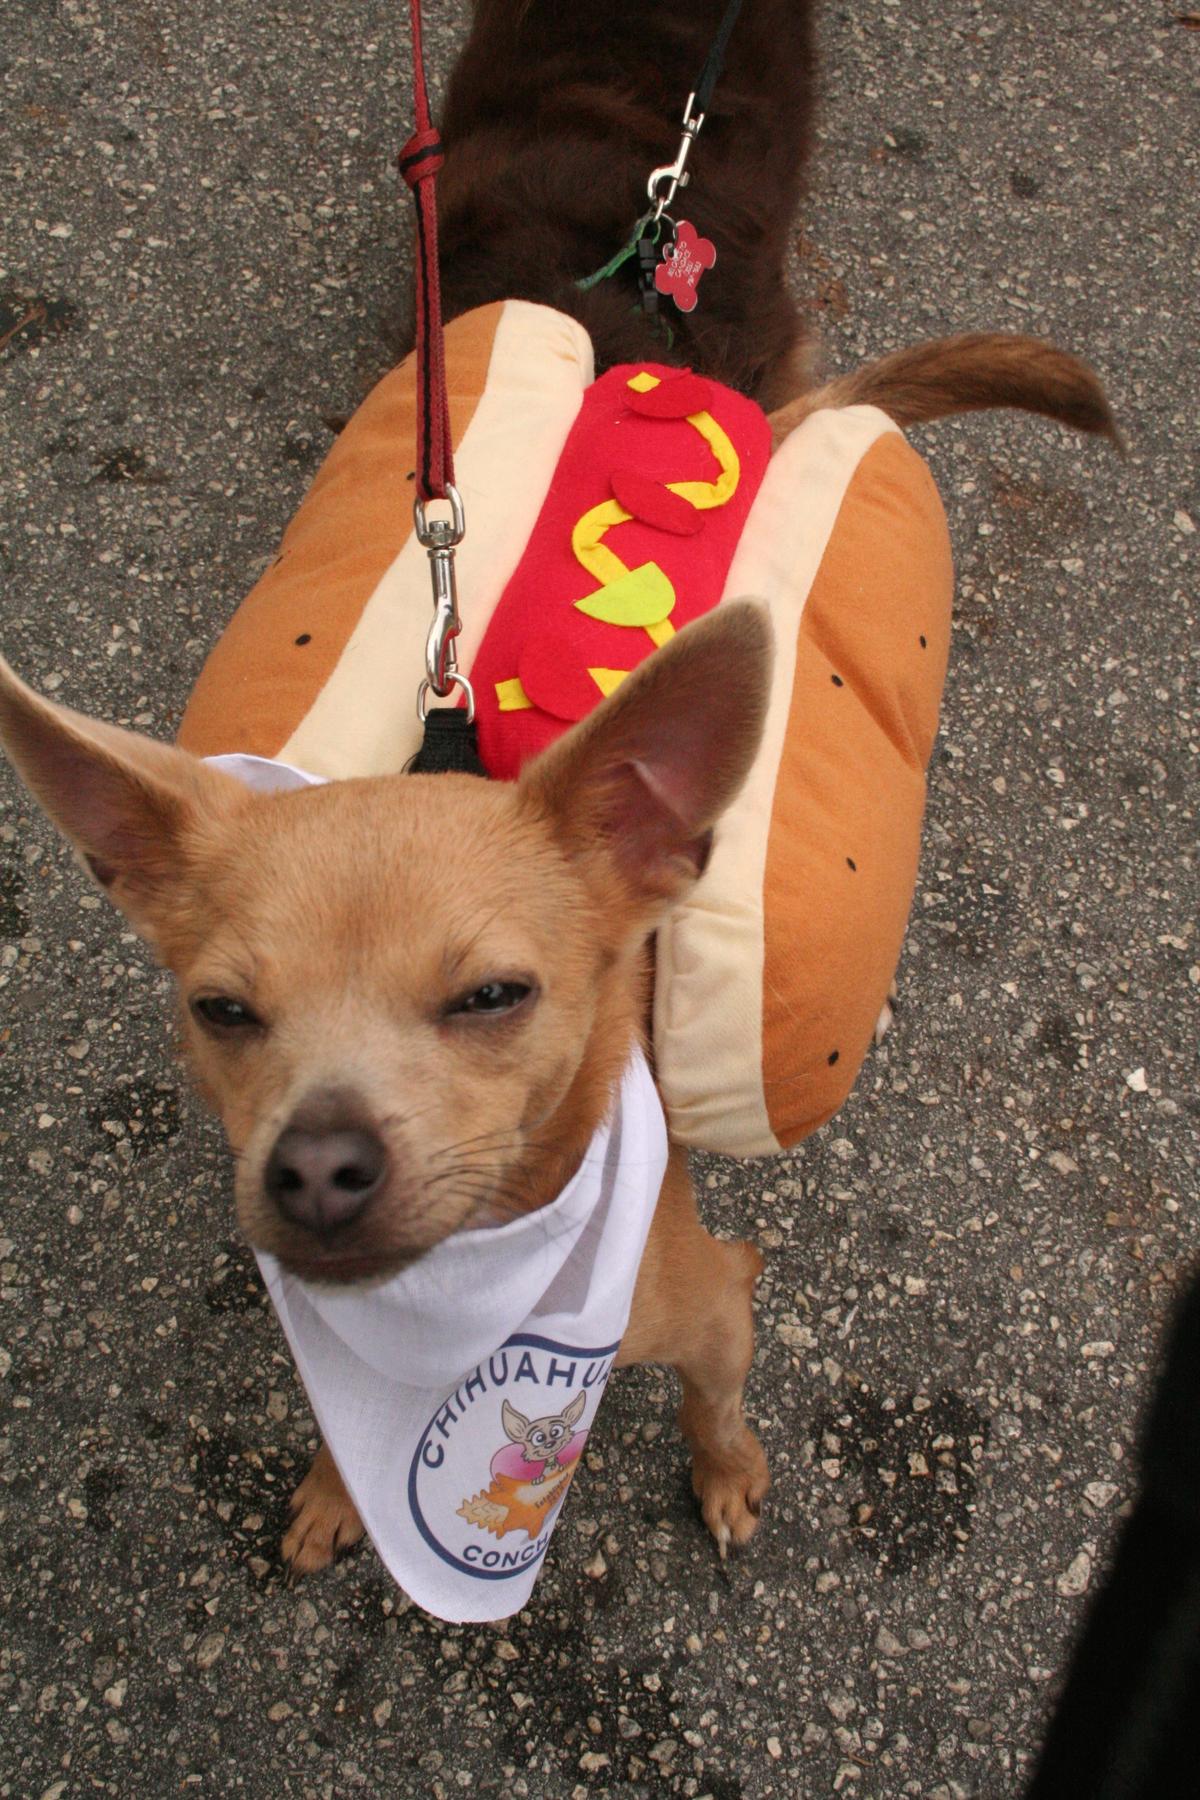 Little Dogs Make Big Splash In Annual Key West New Year's Parade WLRN